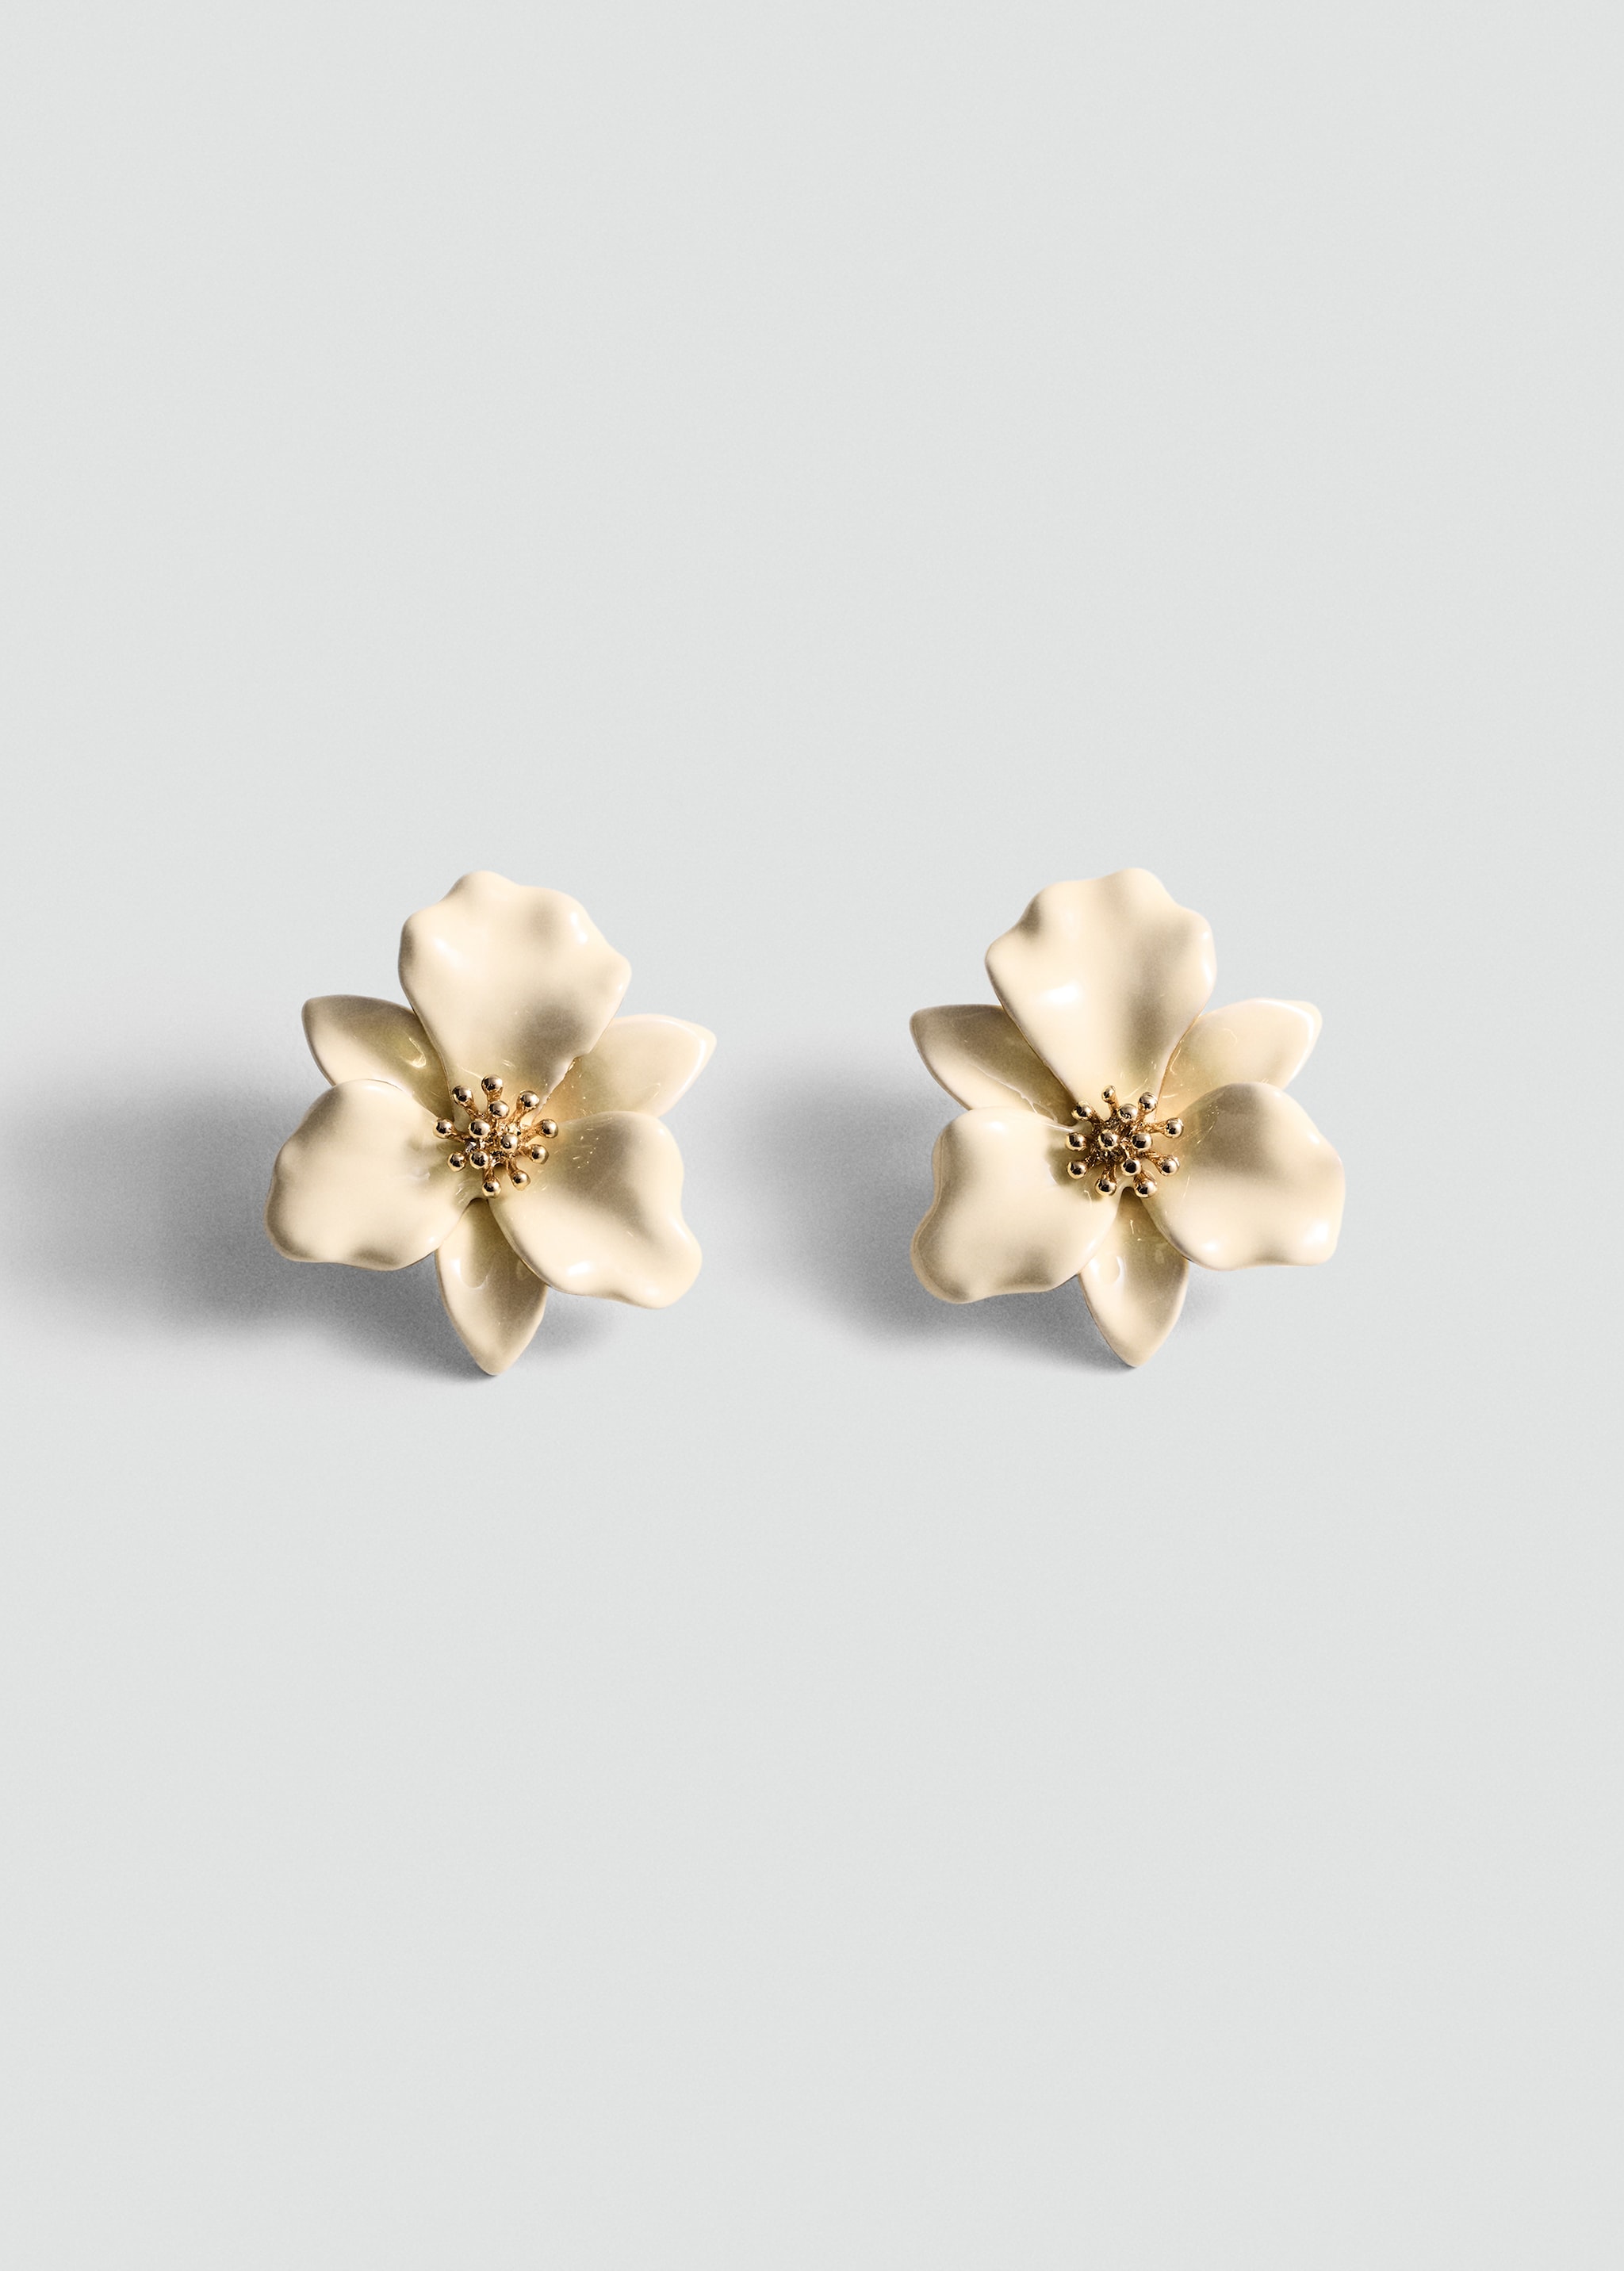 Floral earrings - Article without model